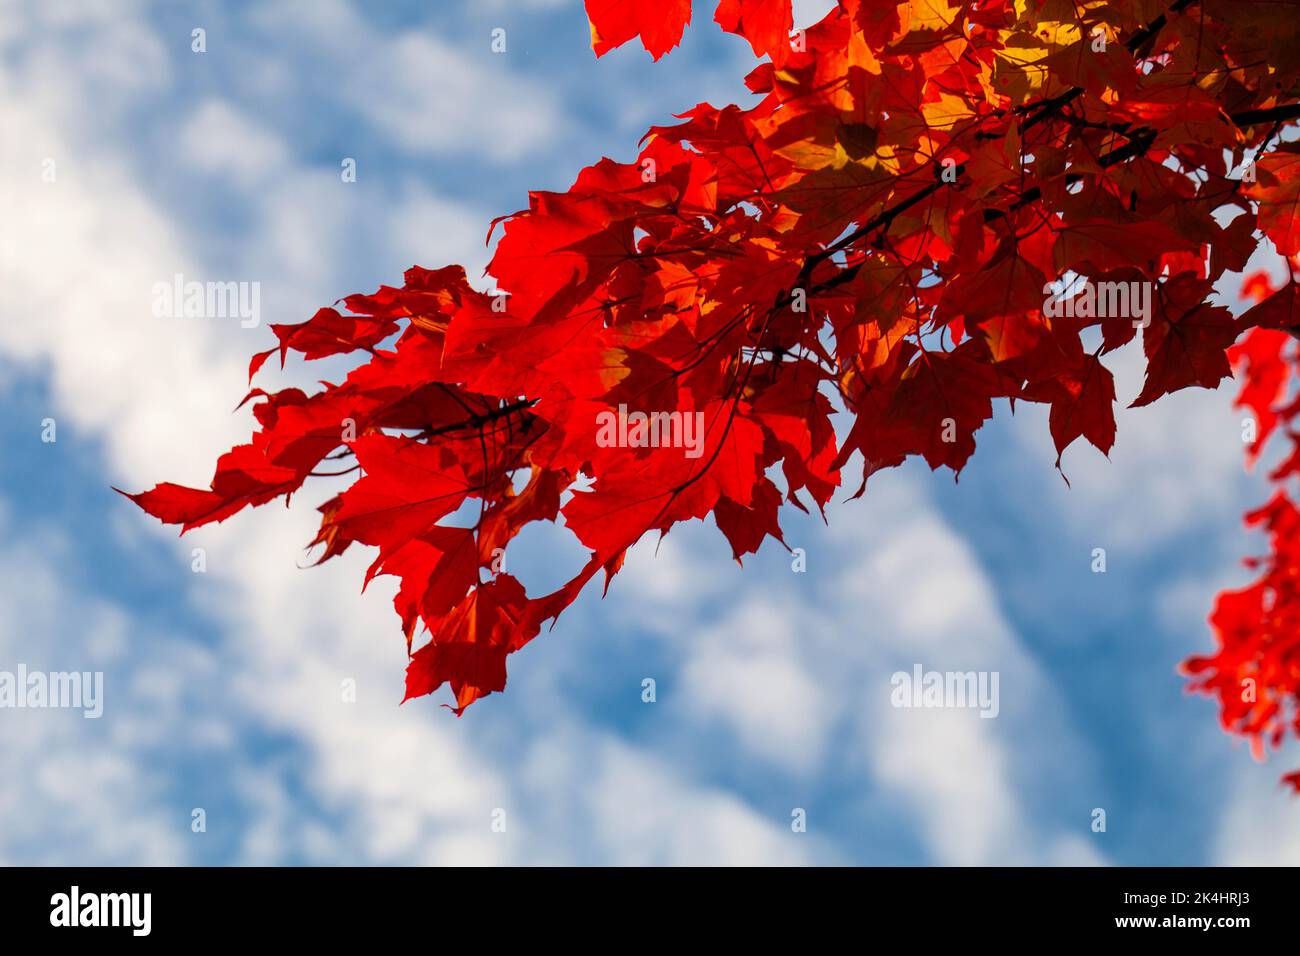 Maple leaves turned red and orange with a blue sky and white clouds, horizontal Stock Photo